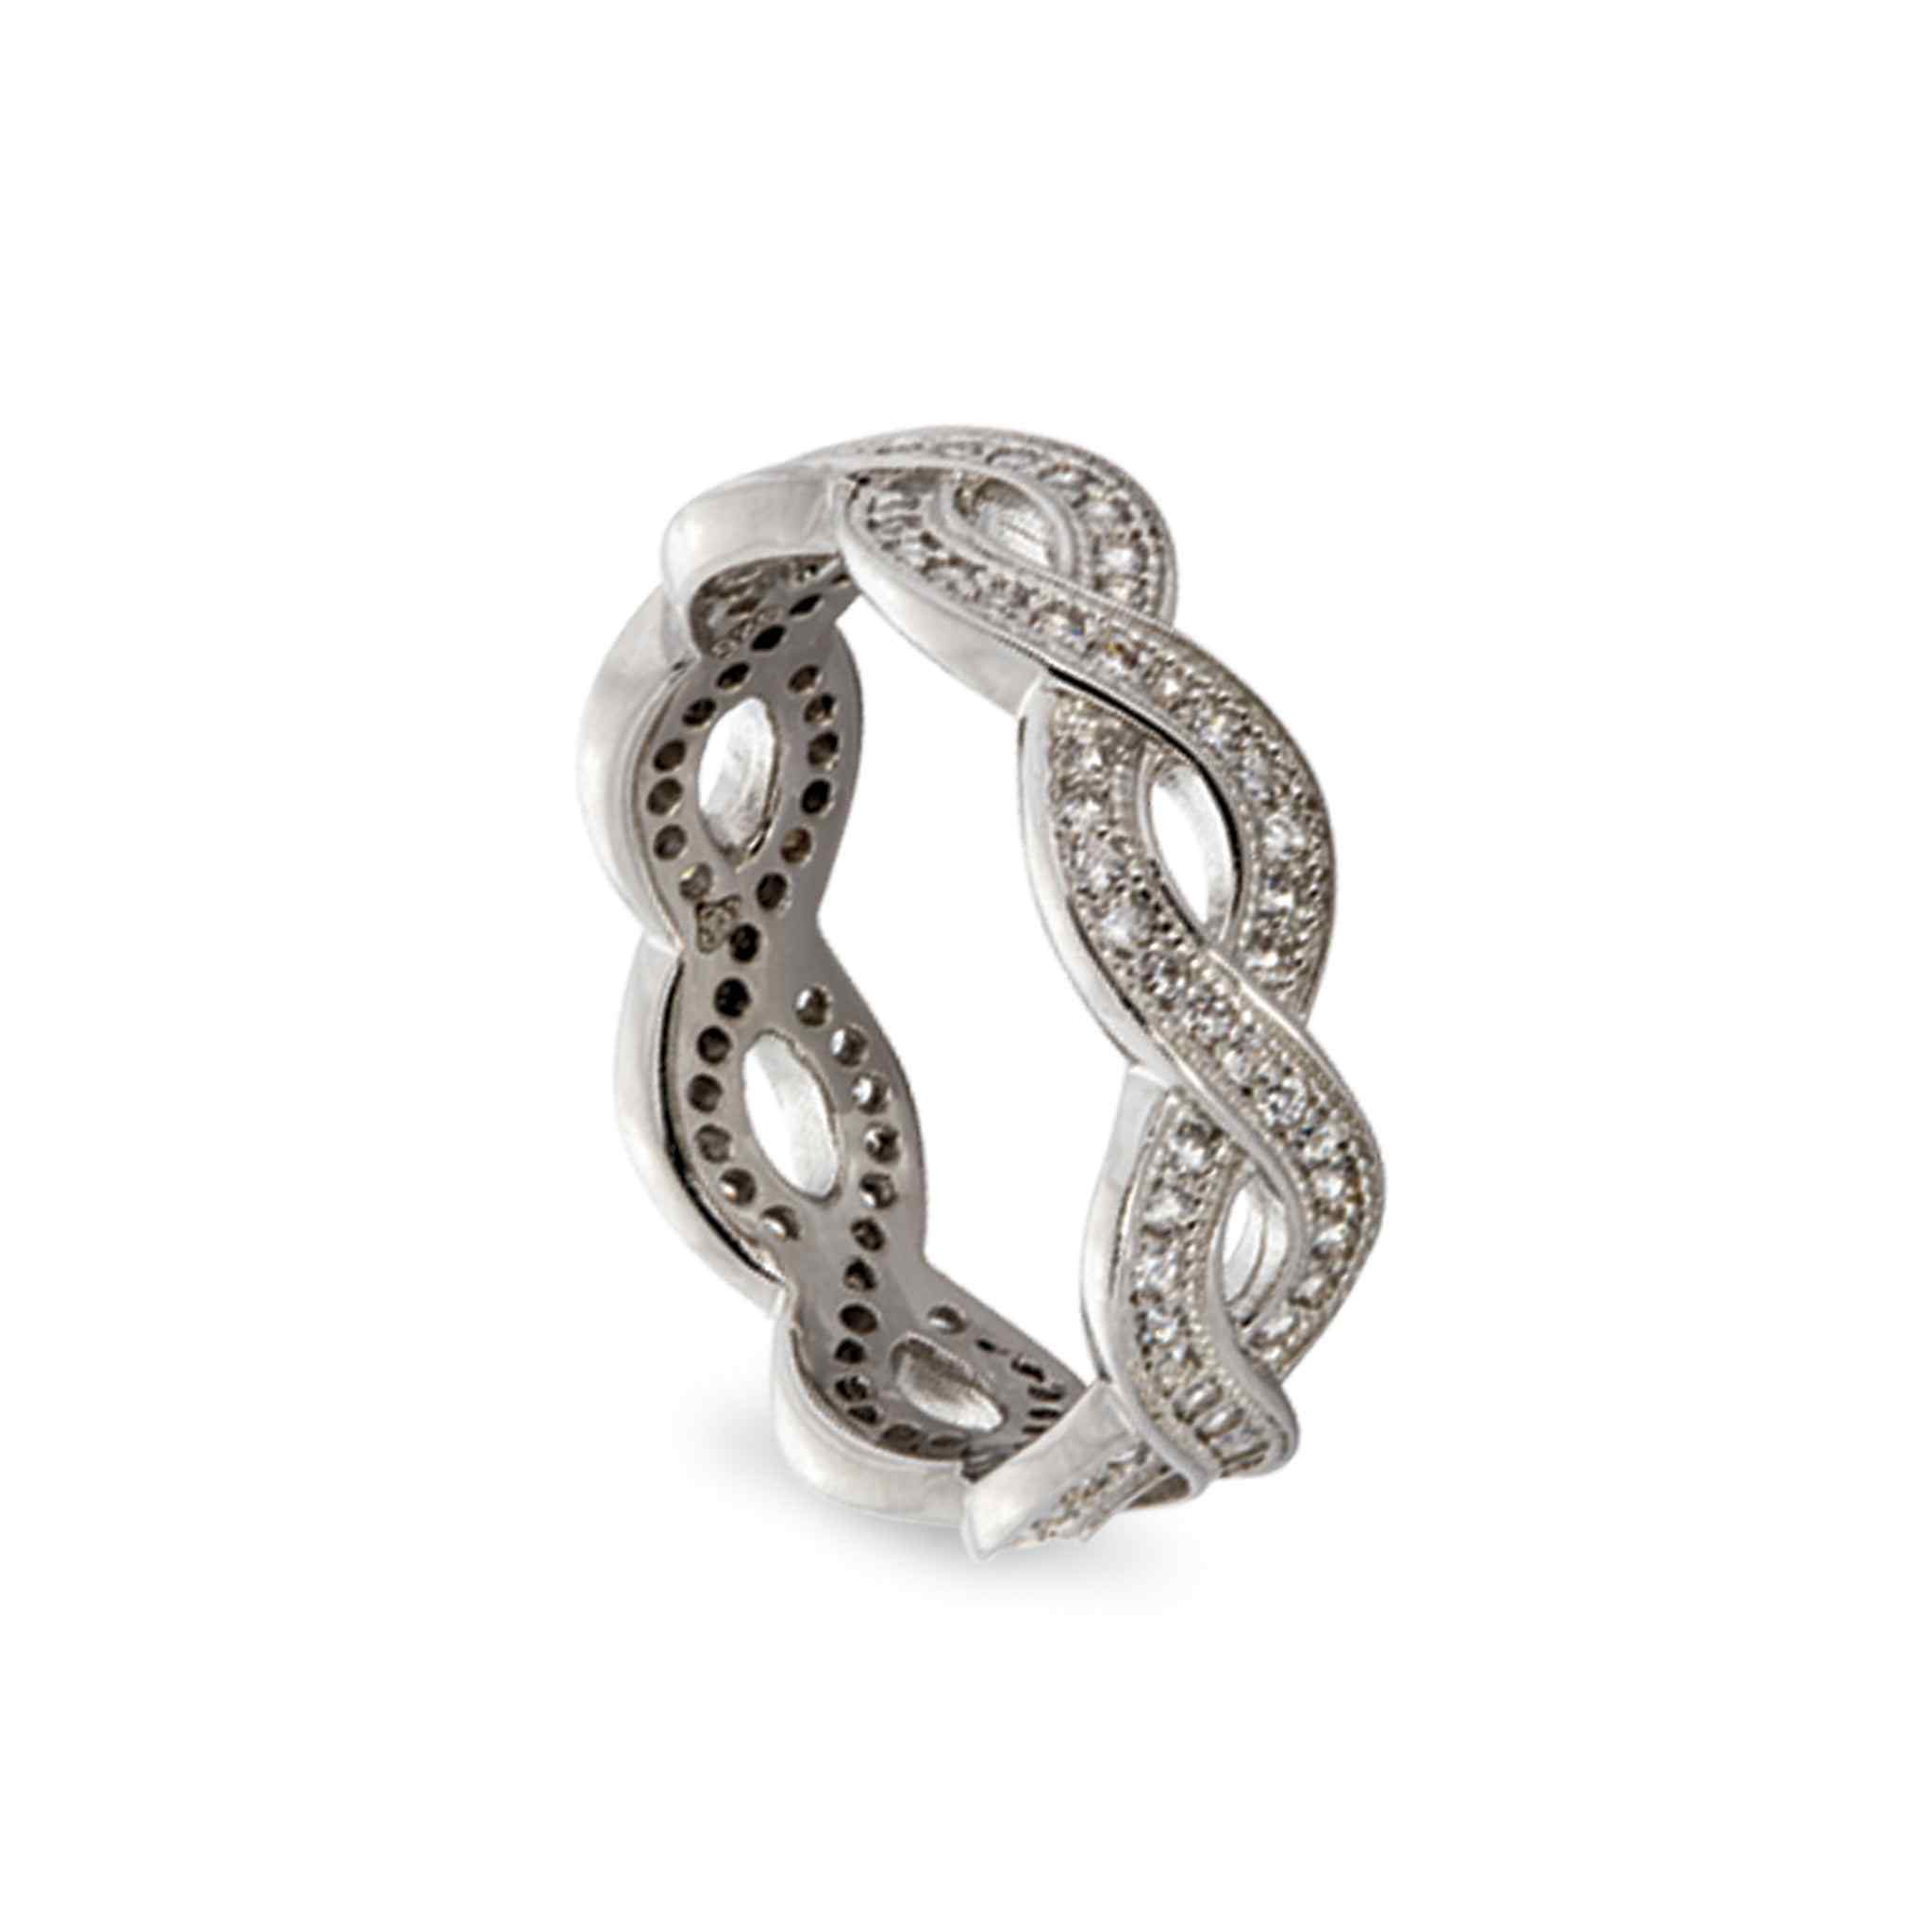 Shop LC Women Silver Spinner Band Wedding Anxiety Ring Infinity for Retro  Size 11 Birthday Gifts for Women - Walmart.com